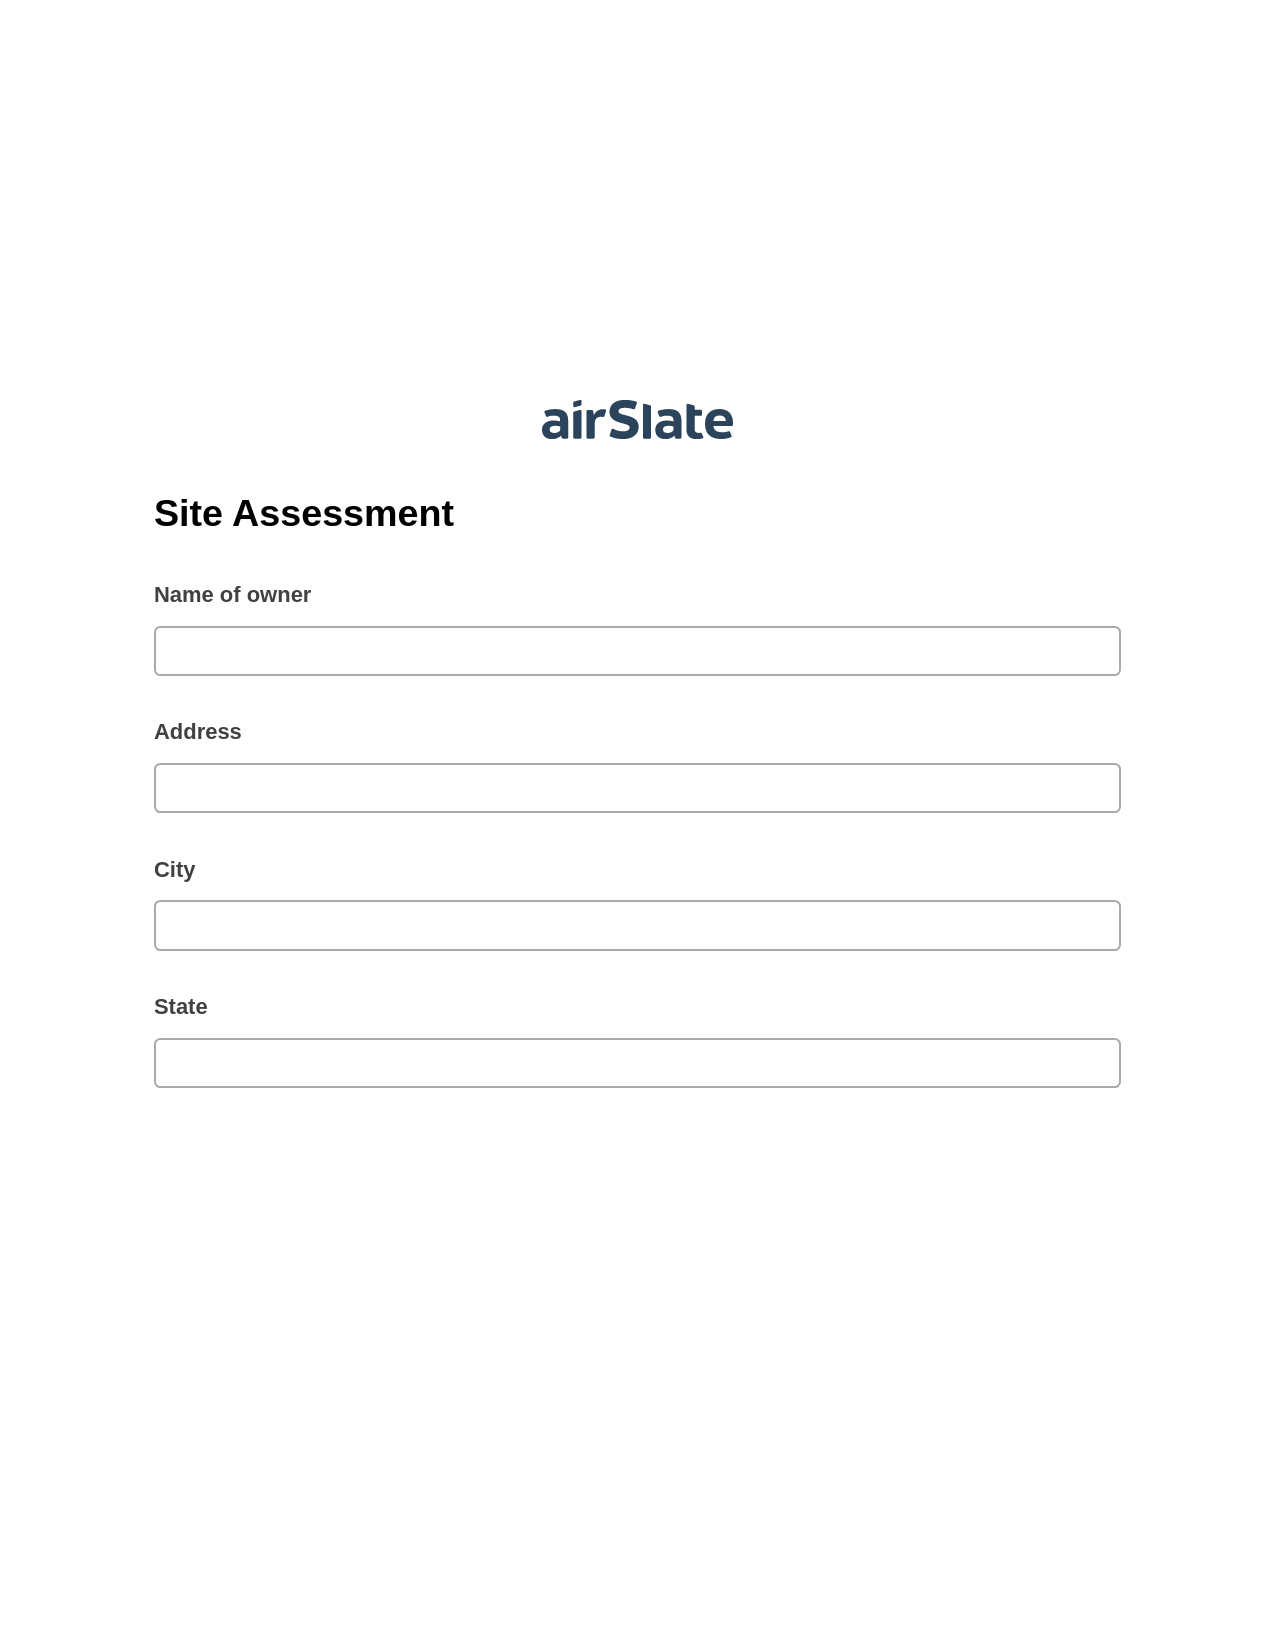 Multirole Site Assessment Pre-fill Slate from MS Dynamics 365 Records Bot, Reminder Bot, Dropbox Bot